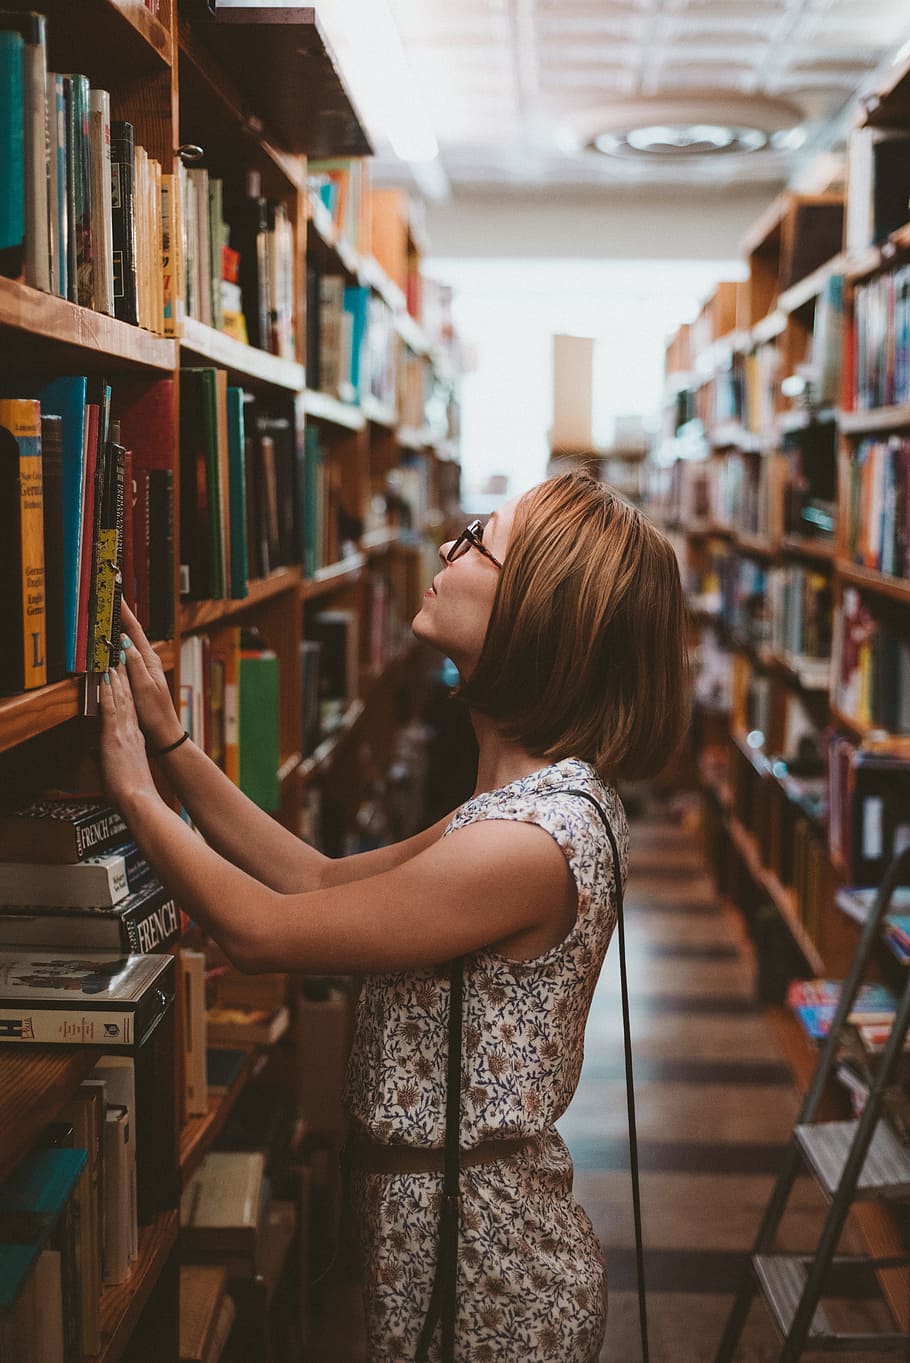 woman standing between library book shelves, woman wearing white and brown floral dress standing near bookshelf looking up